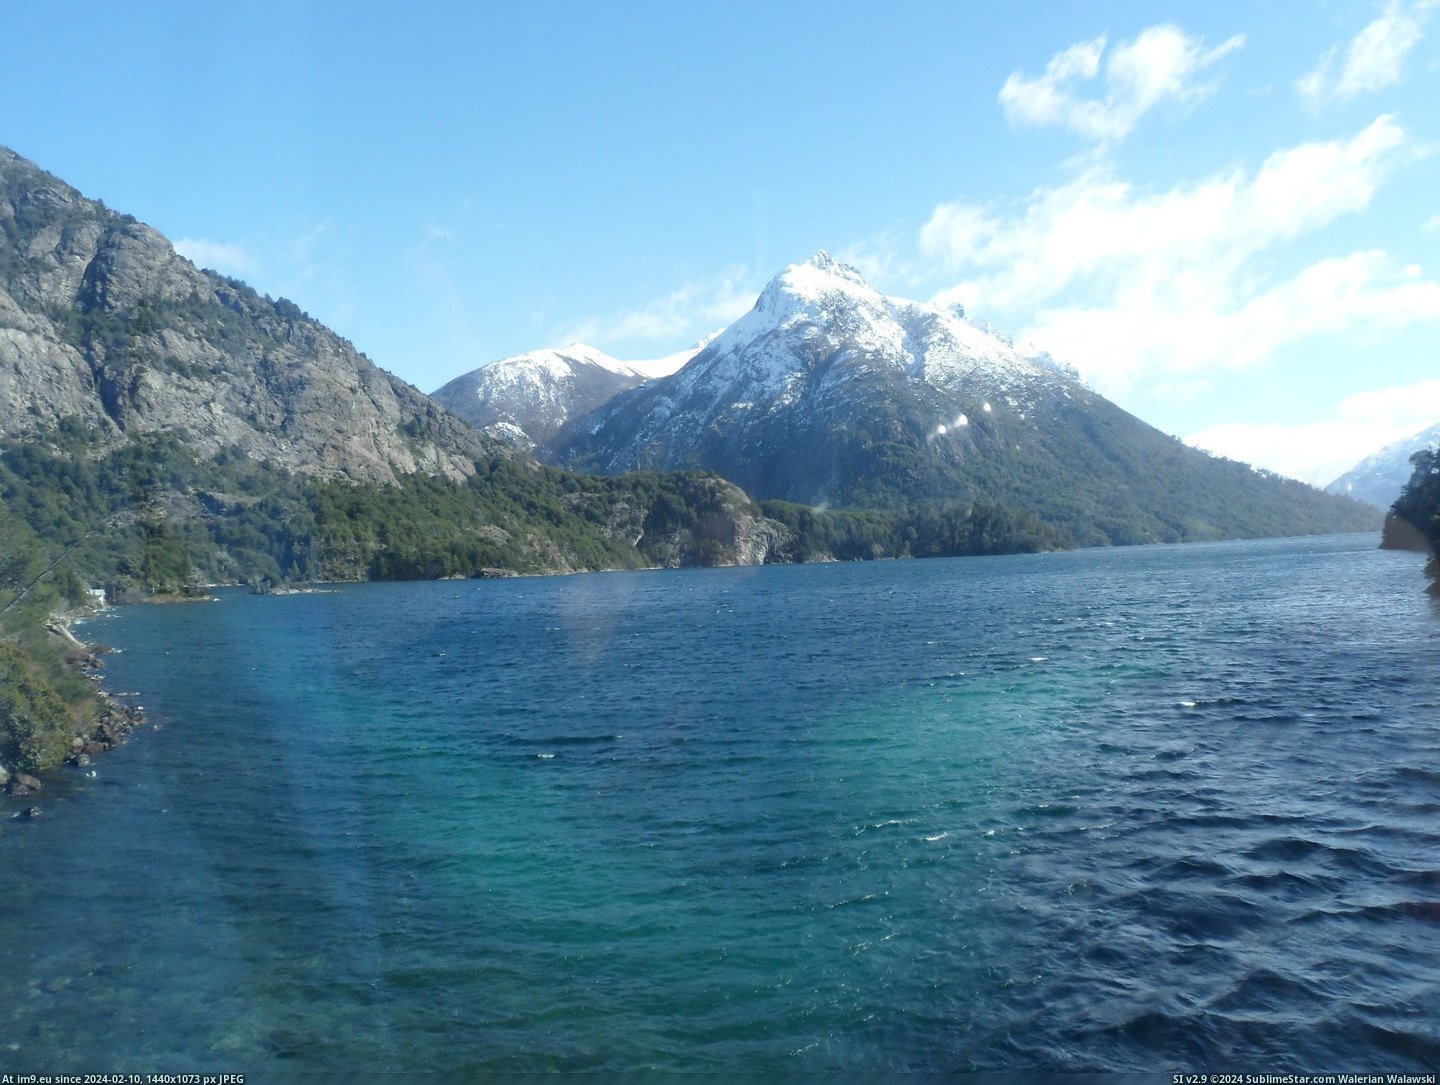 #High #School #Argentina #2592x1944 #Cellphone #Quality #Trip [Earthporn] Bariloche, Argentina  [2592x1944] (Taken from my high school trip, sorry about cellphone quality) Pic. (Изображение из альбом My r/EARTHPORN favs))